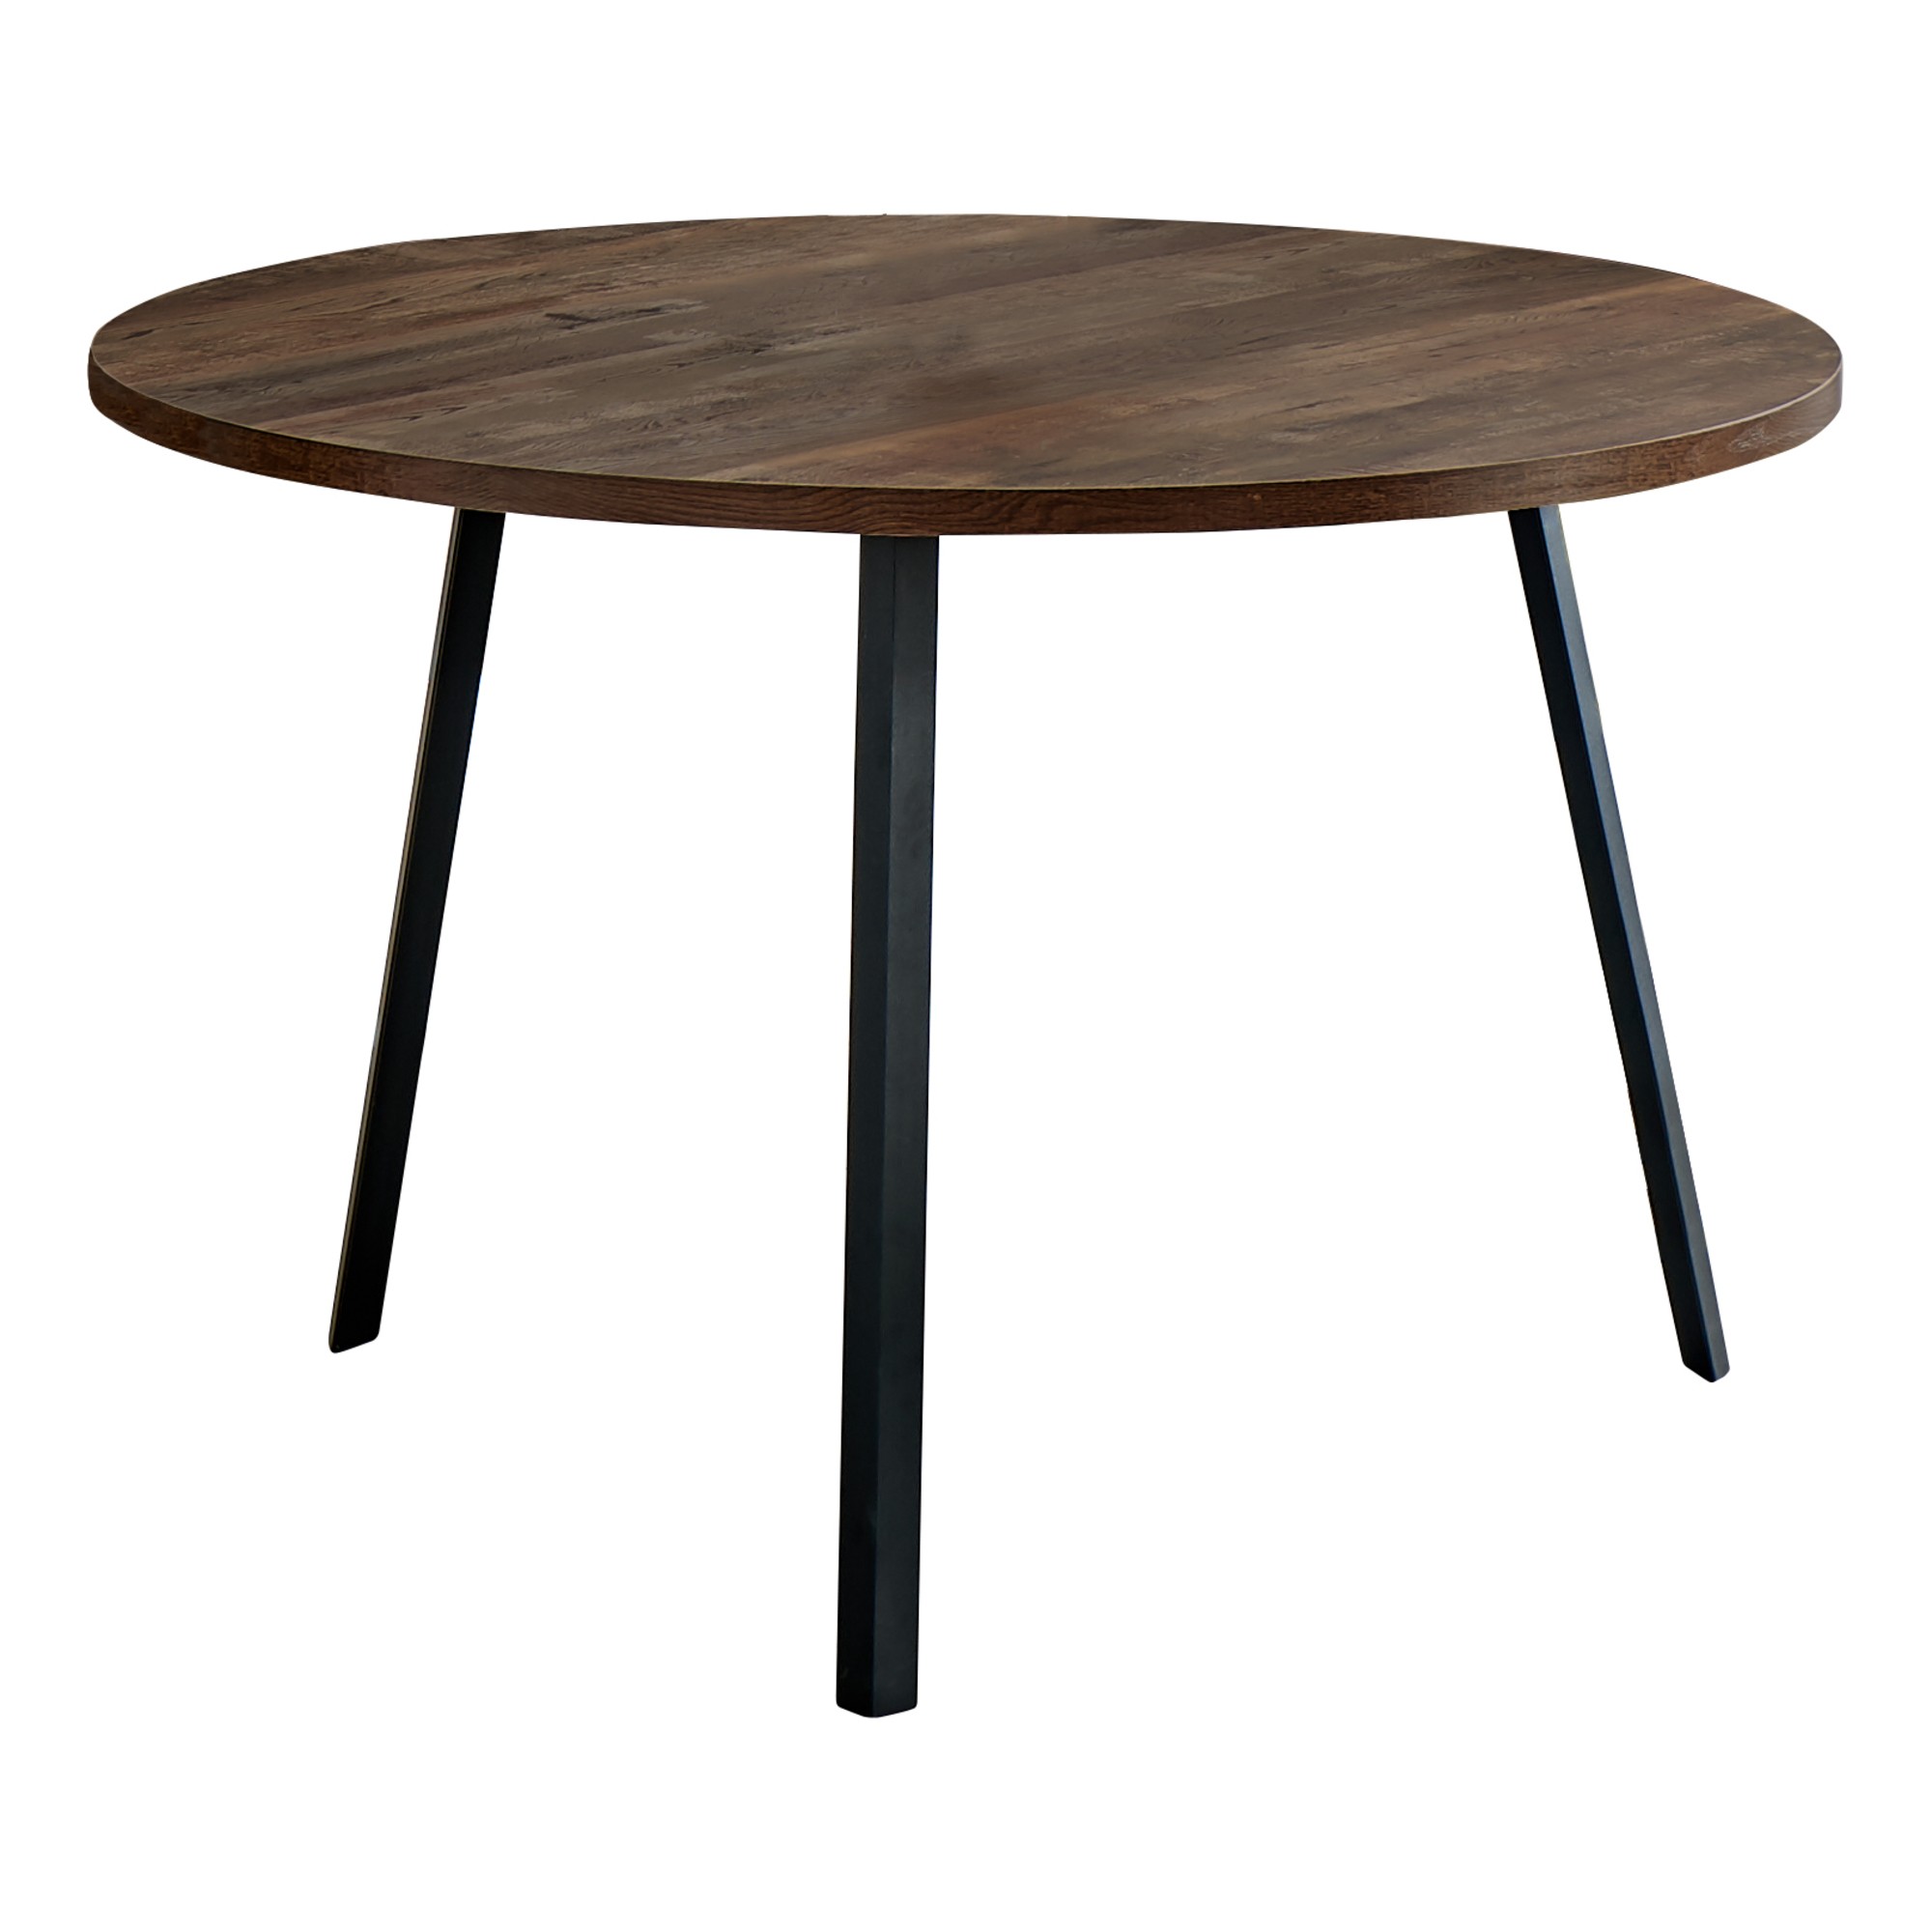 48" Round Dining Room Table with Brown Reclaimed Wood and Black Metal